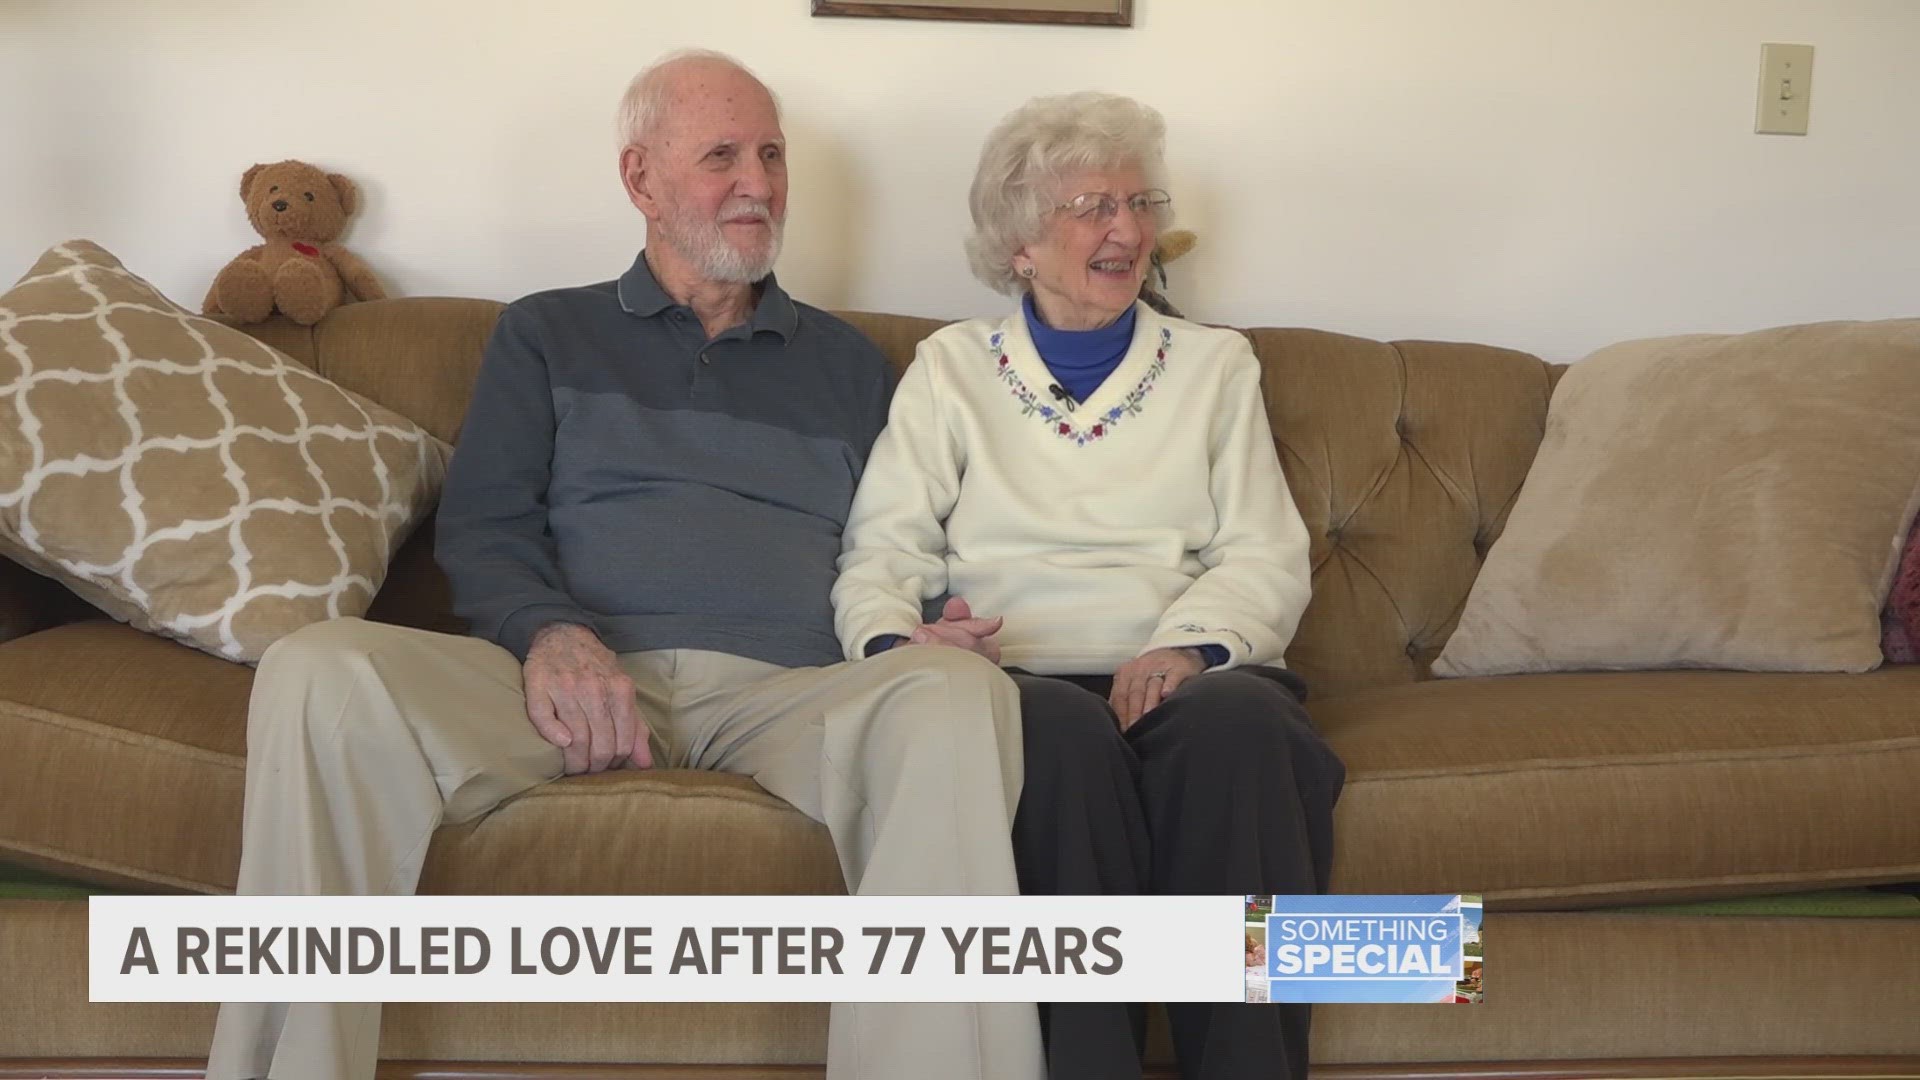 Both over 90 years old, this couple's journey began by sharing a seat on the school bus.